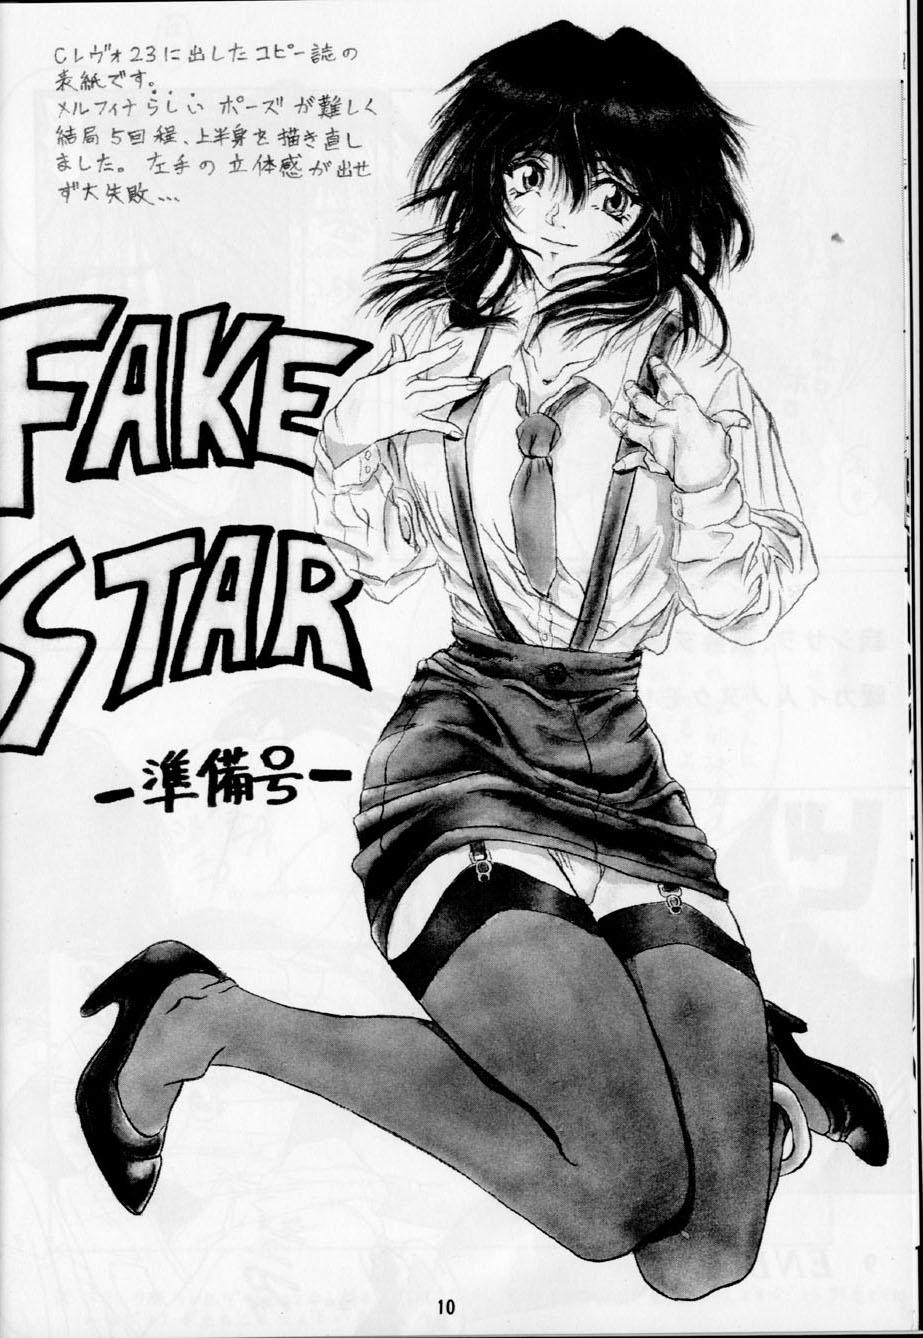 Chastity Fake Star - Outlaw star Skinny - Page 9